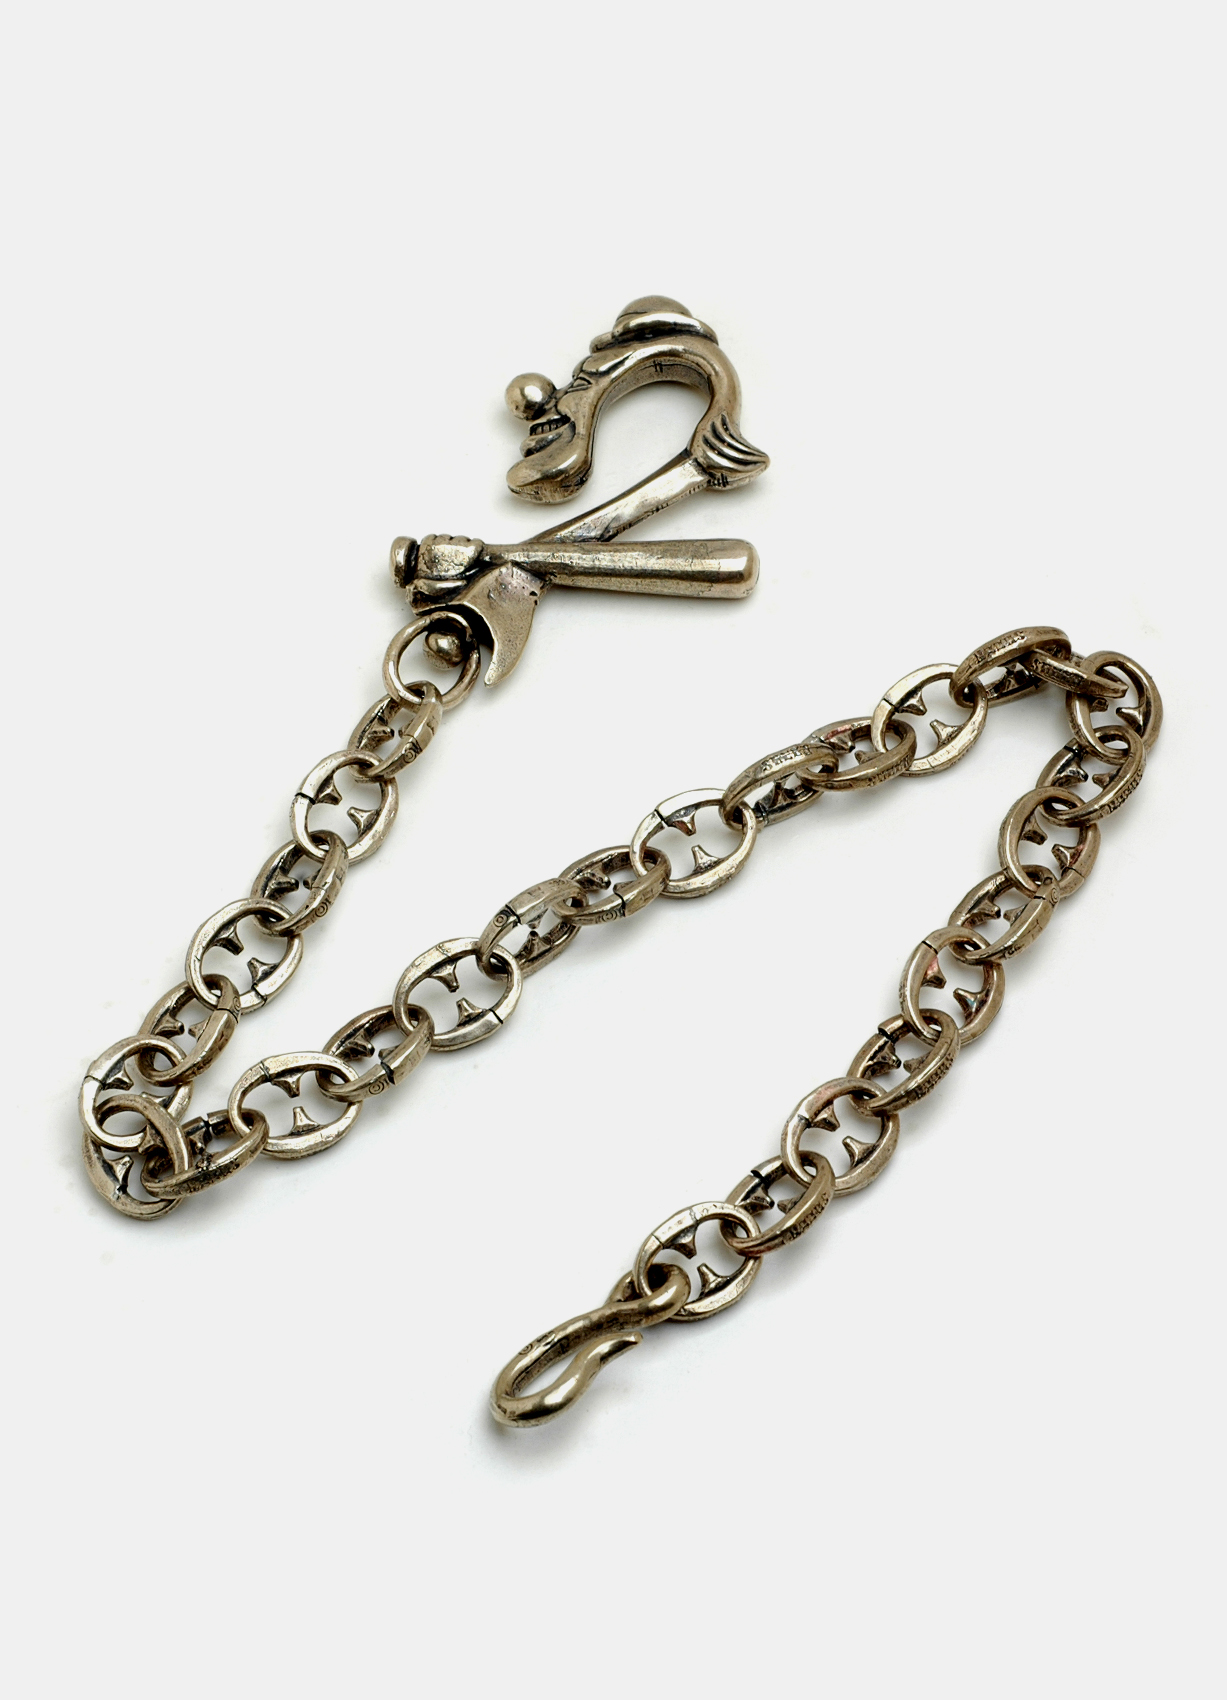 KingPin Brass Casting Wallet Chain